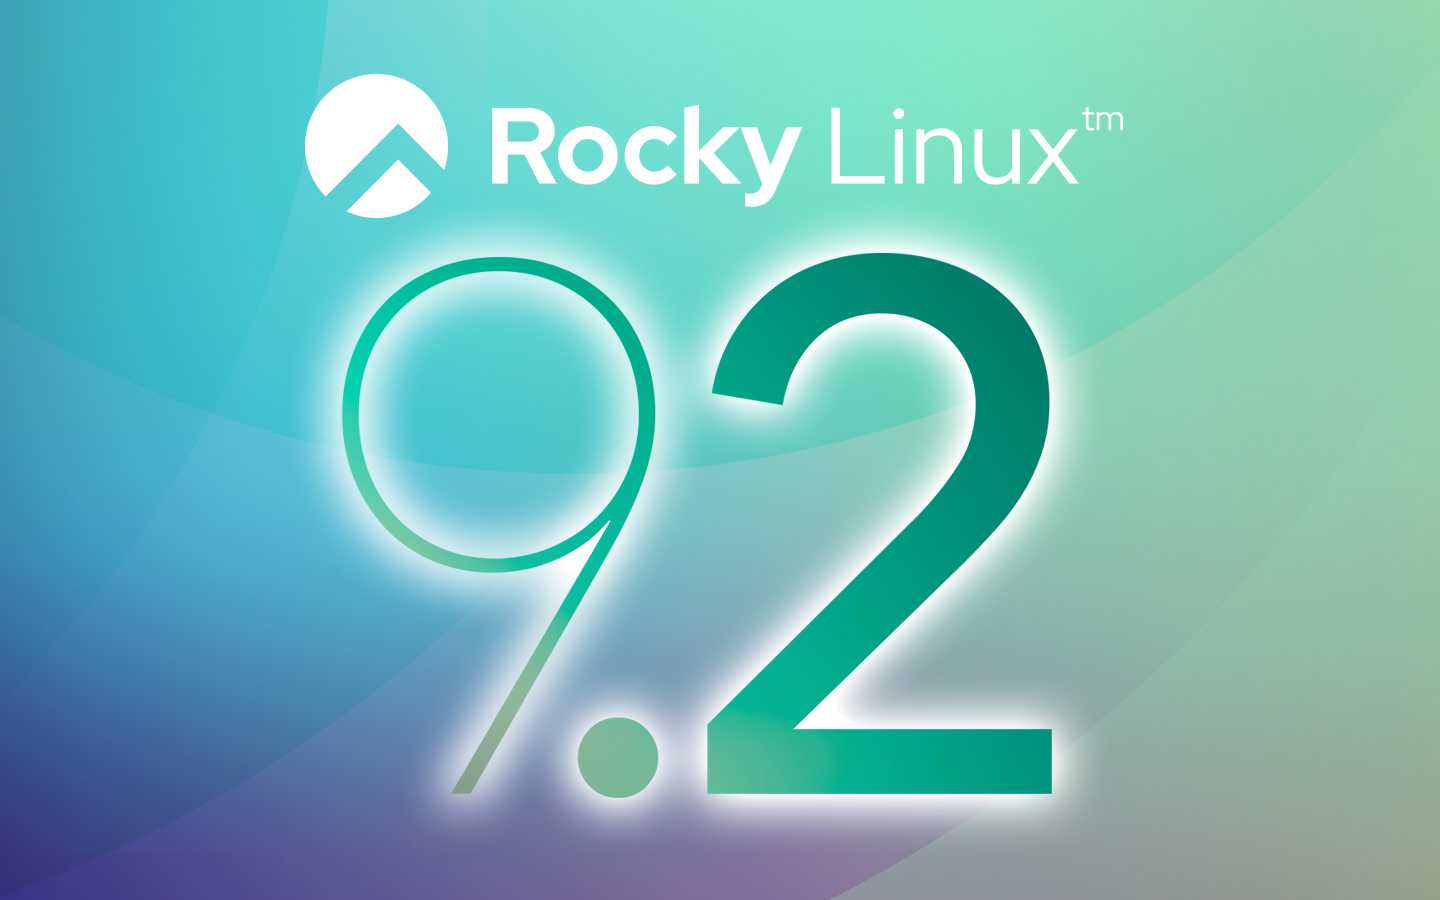 Rocky Linux 9.2 Has Been Released